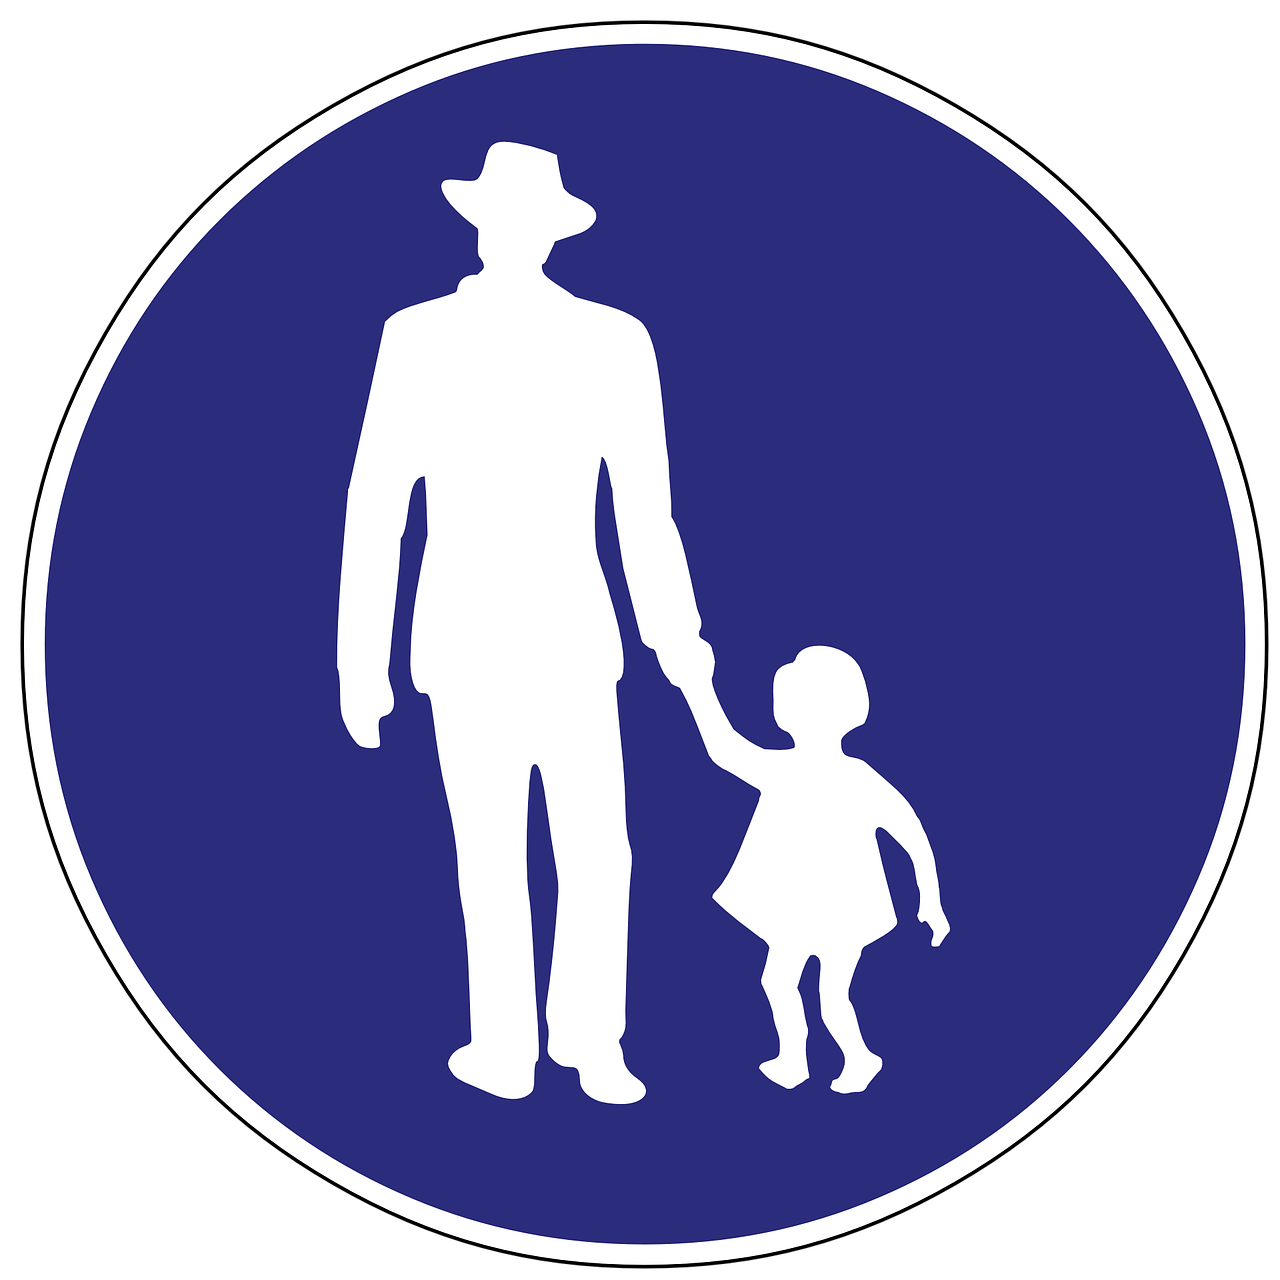 pedestrian crossing sign signage free photo